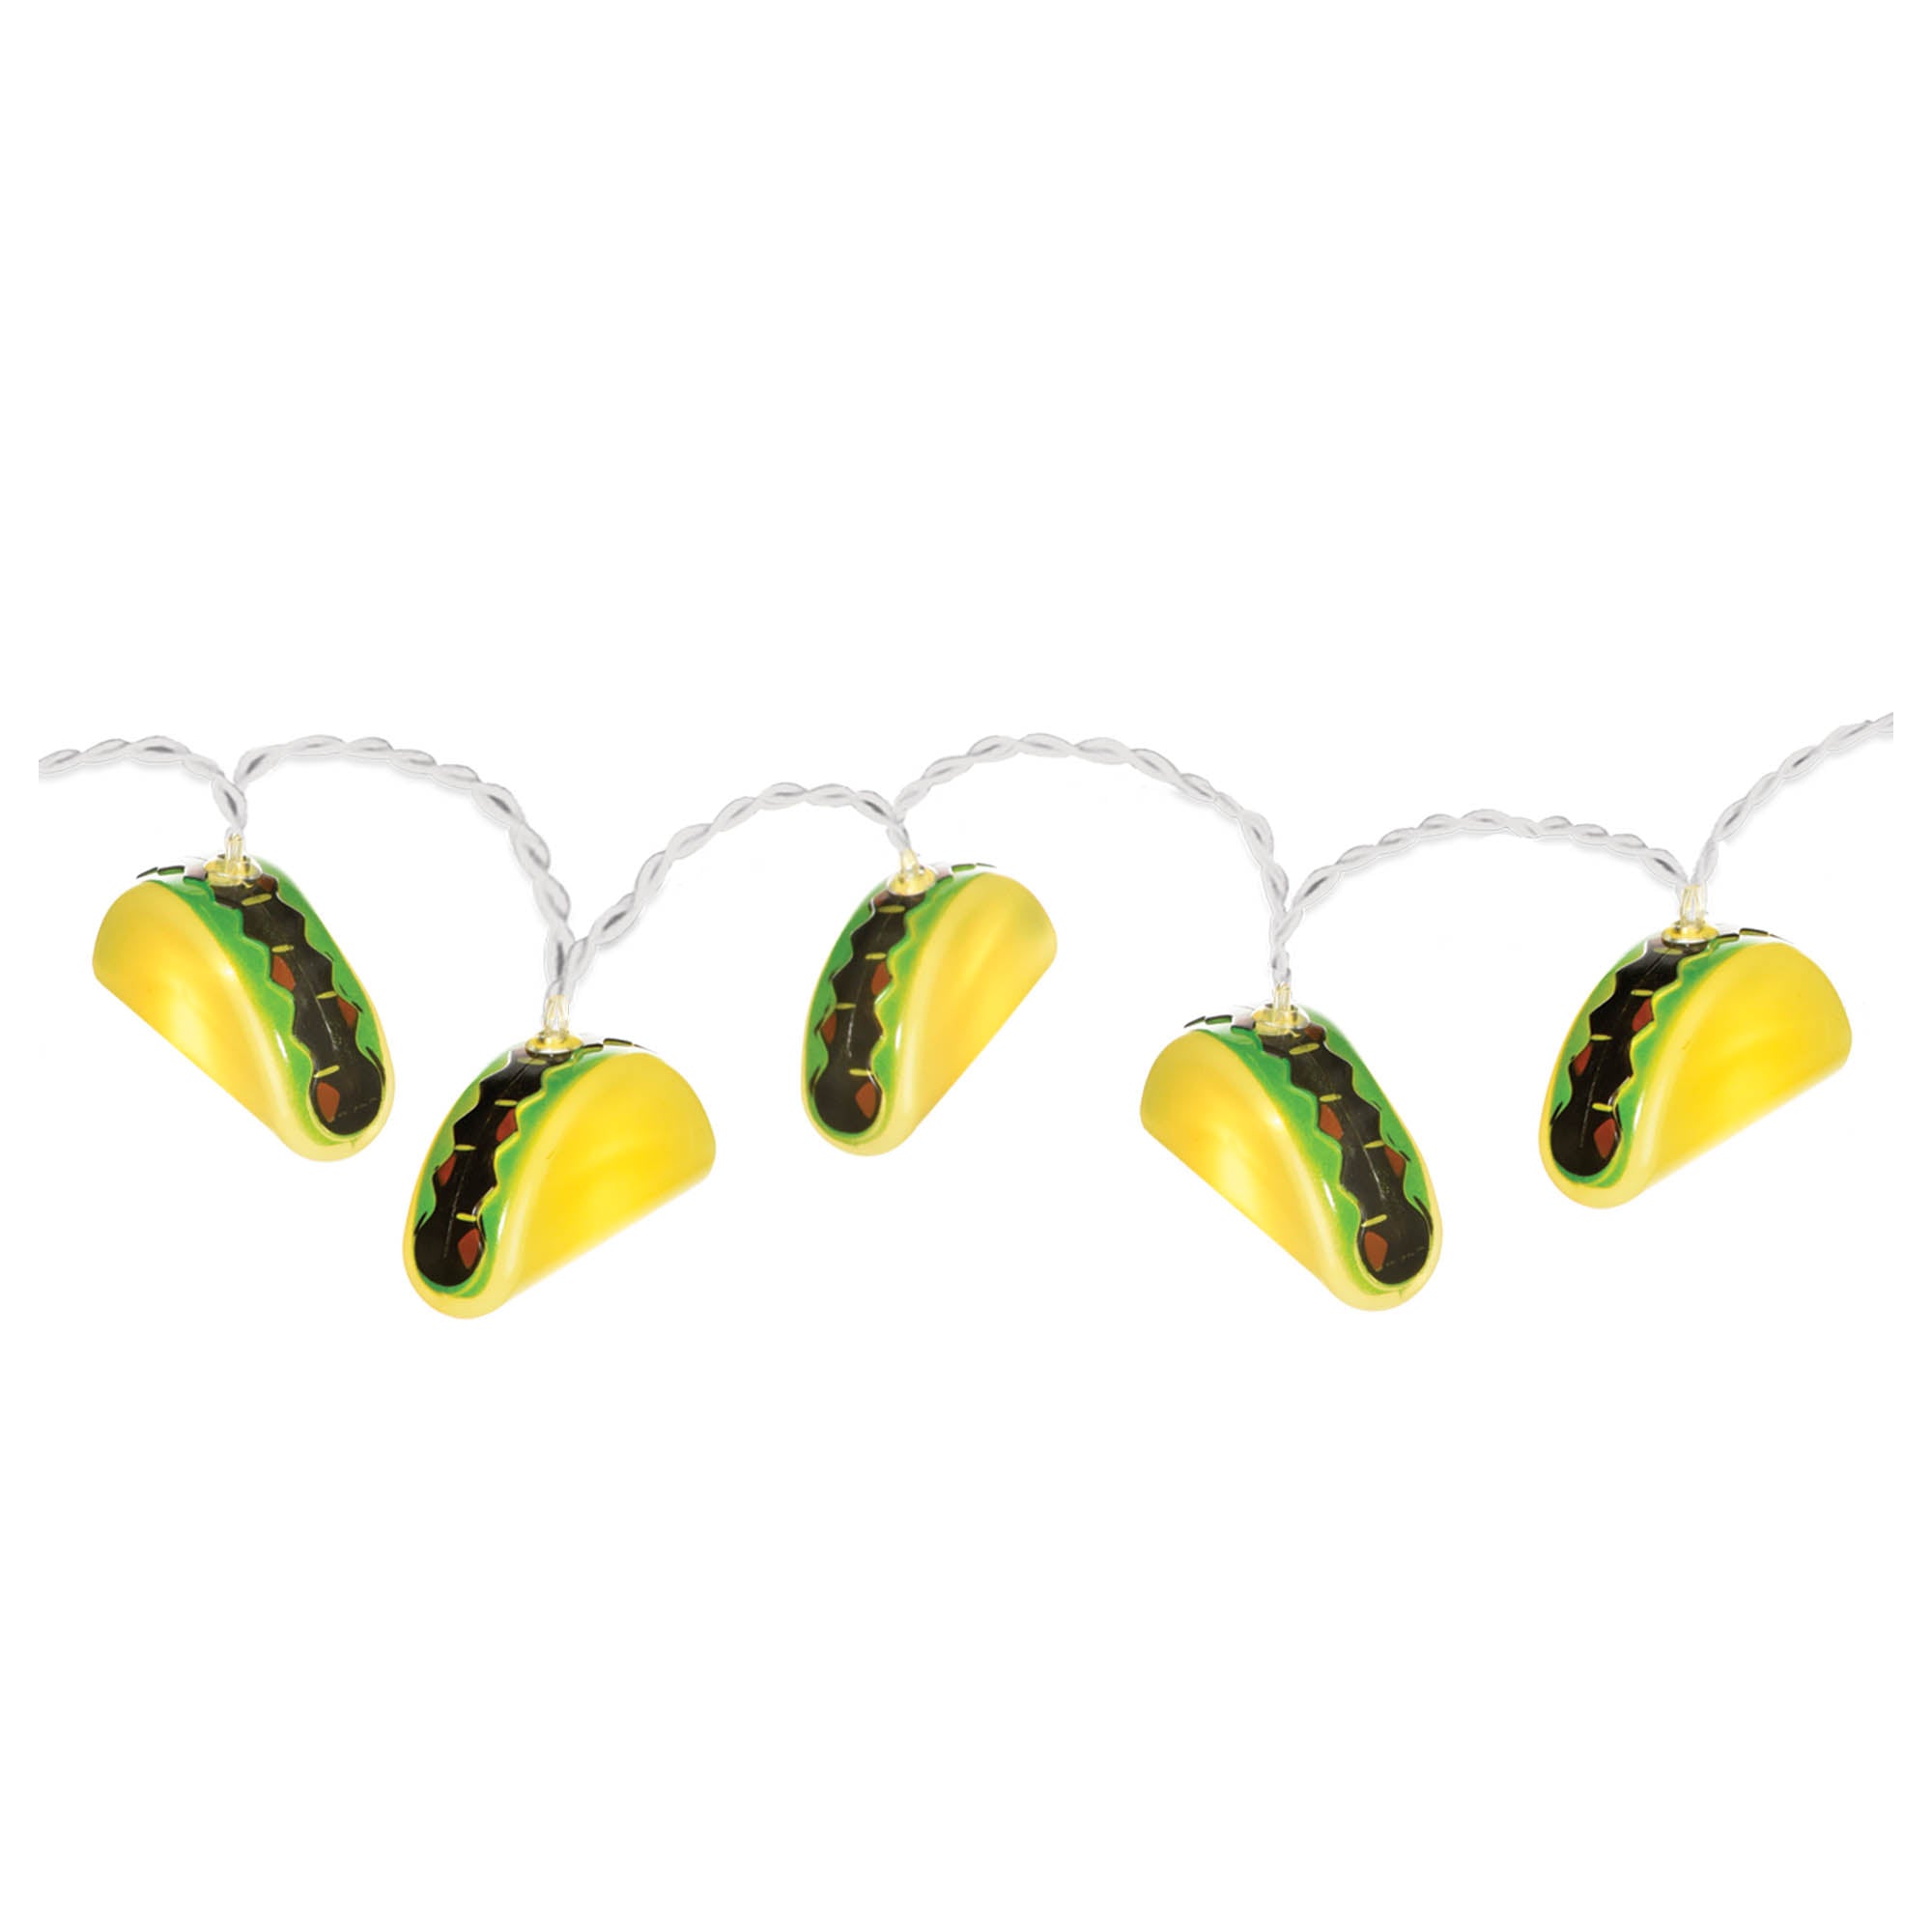 Taco Battery Operated String Lights 10 Tacos on 5 3/4' total length